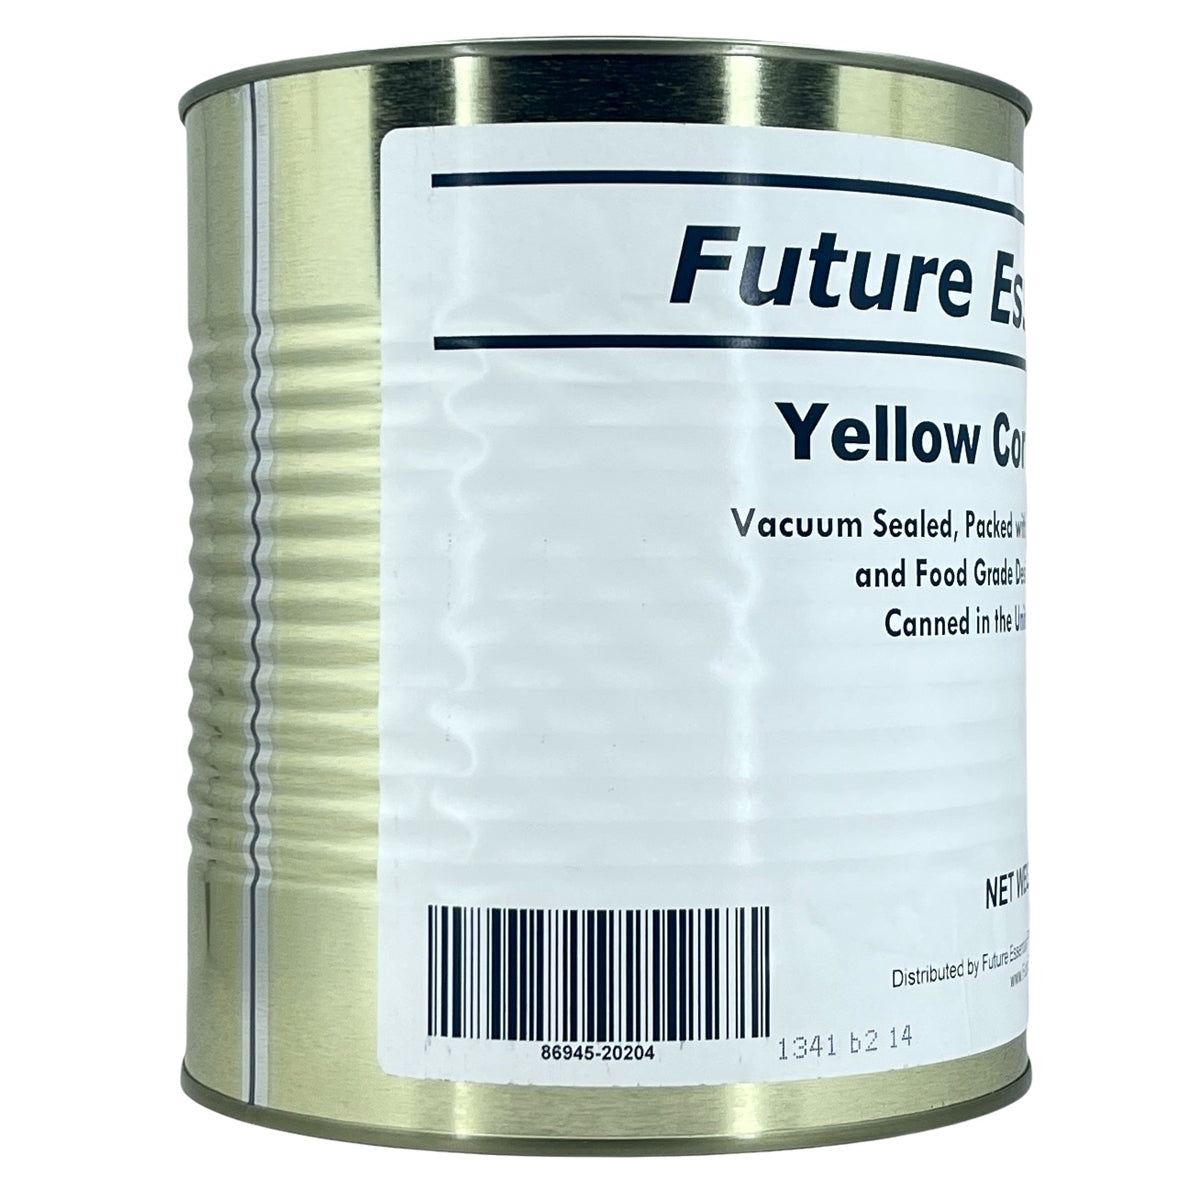 Future Essentials Yellow Corn Meal #10 Can